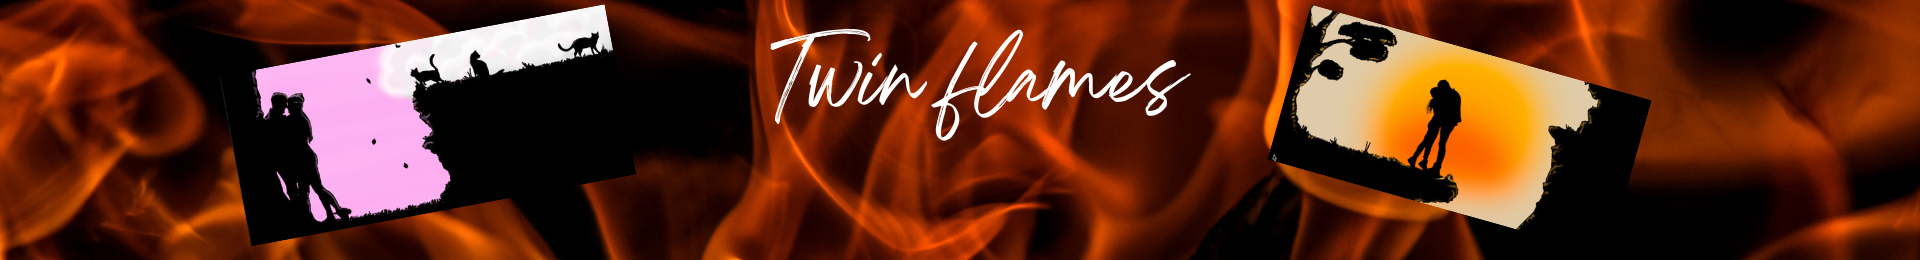 Twin flames banner